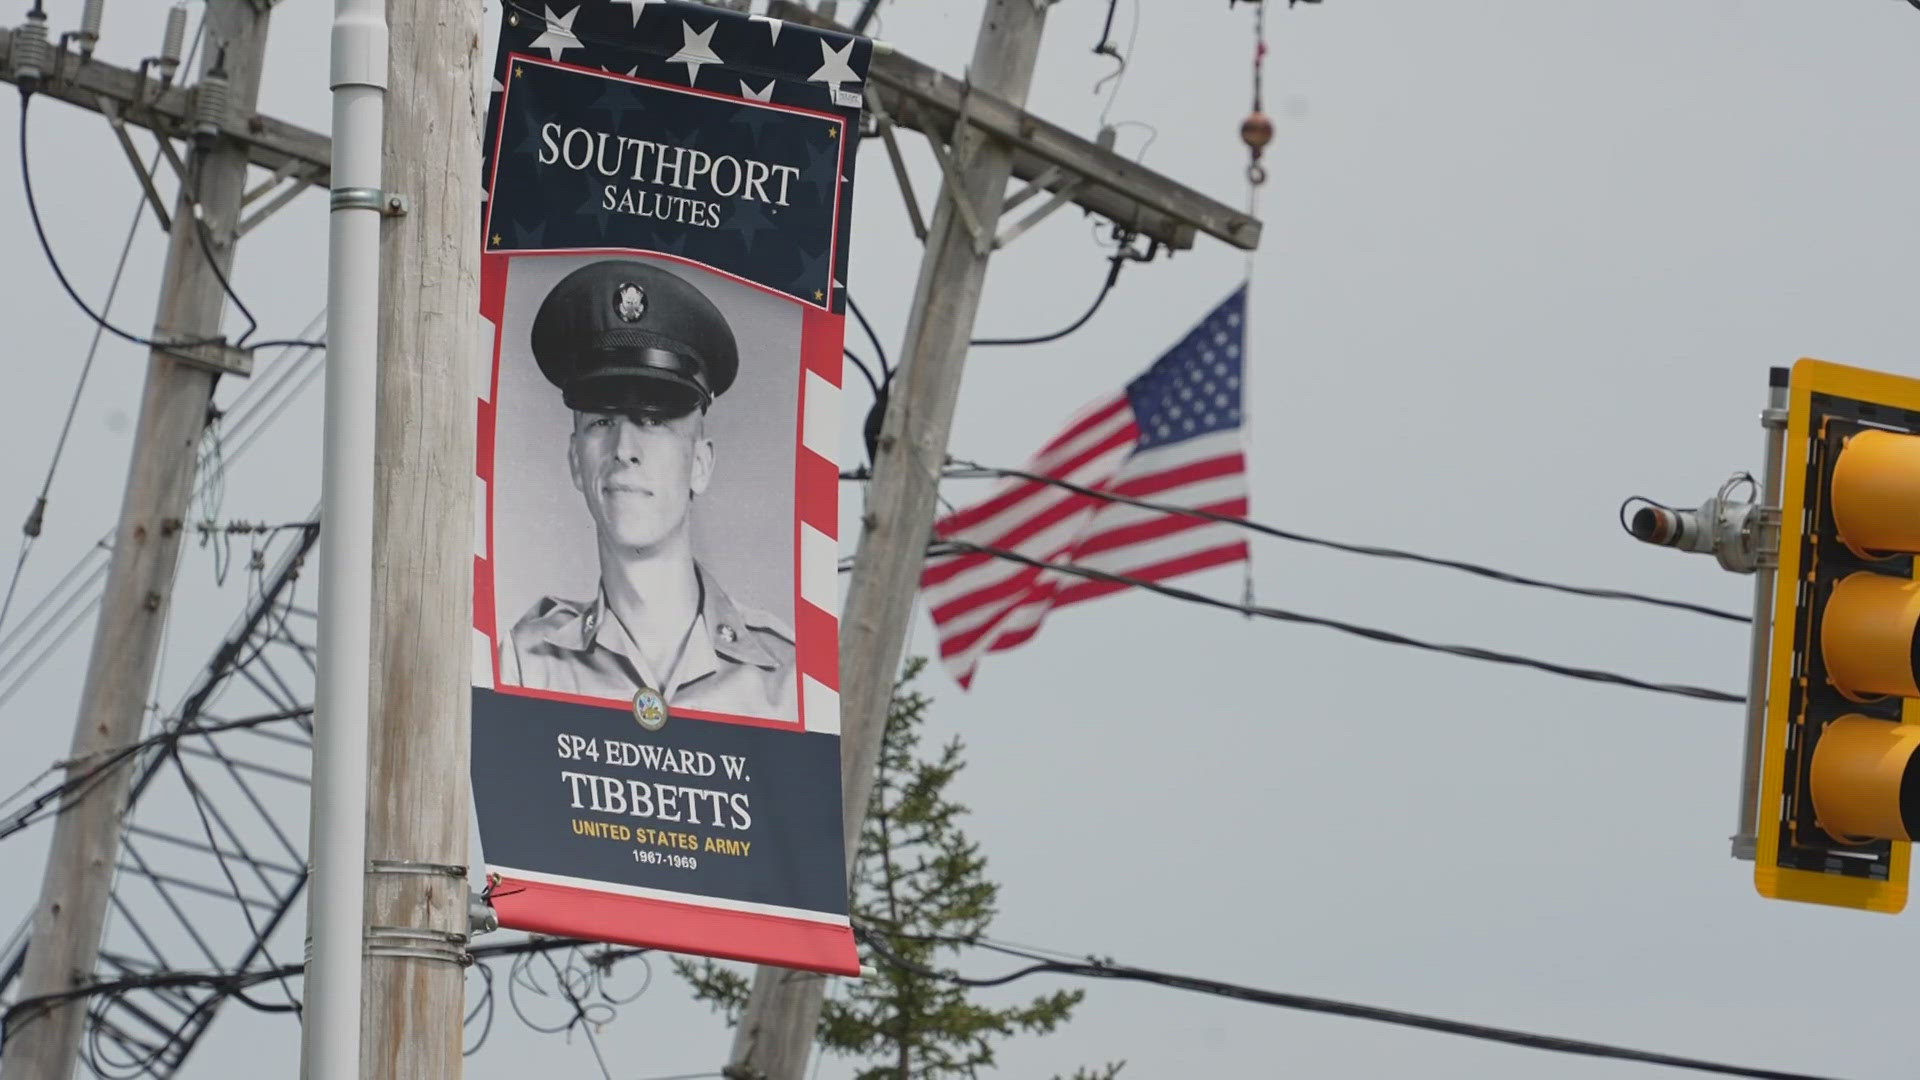 Five towns on the Boothbay peninsula took part in the cause, with more orders expected after Memorial Day.